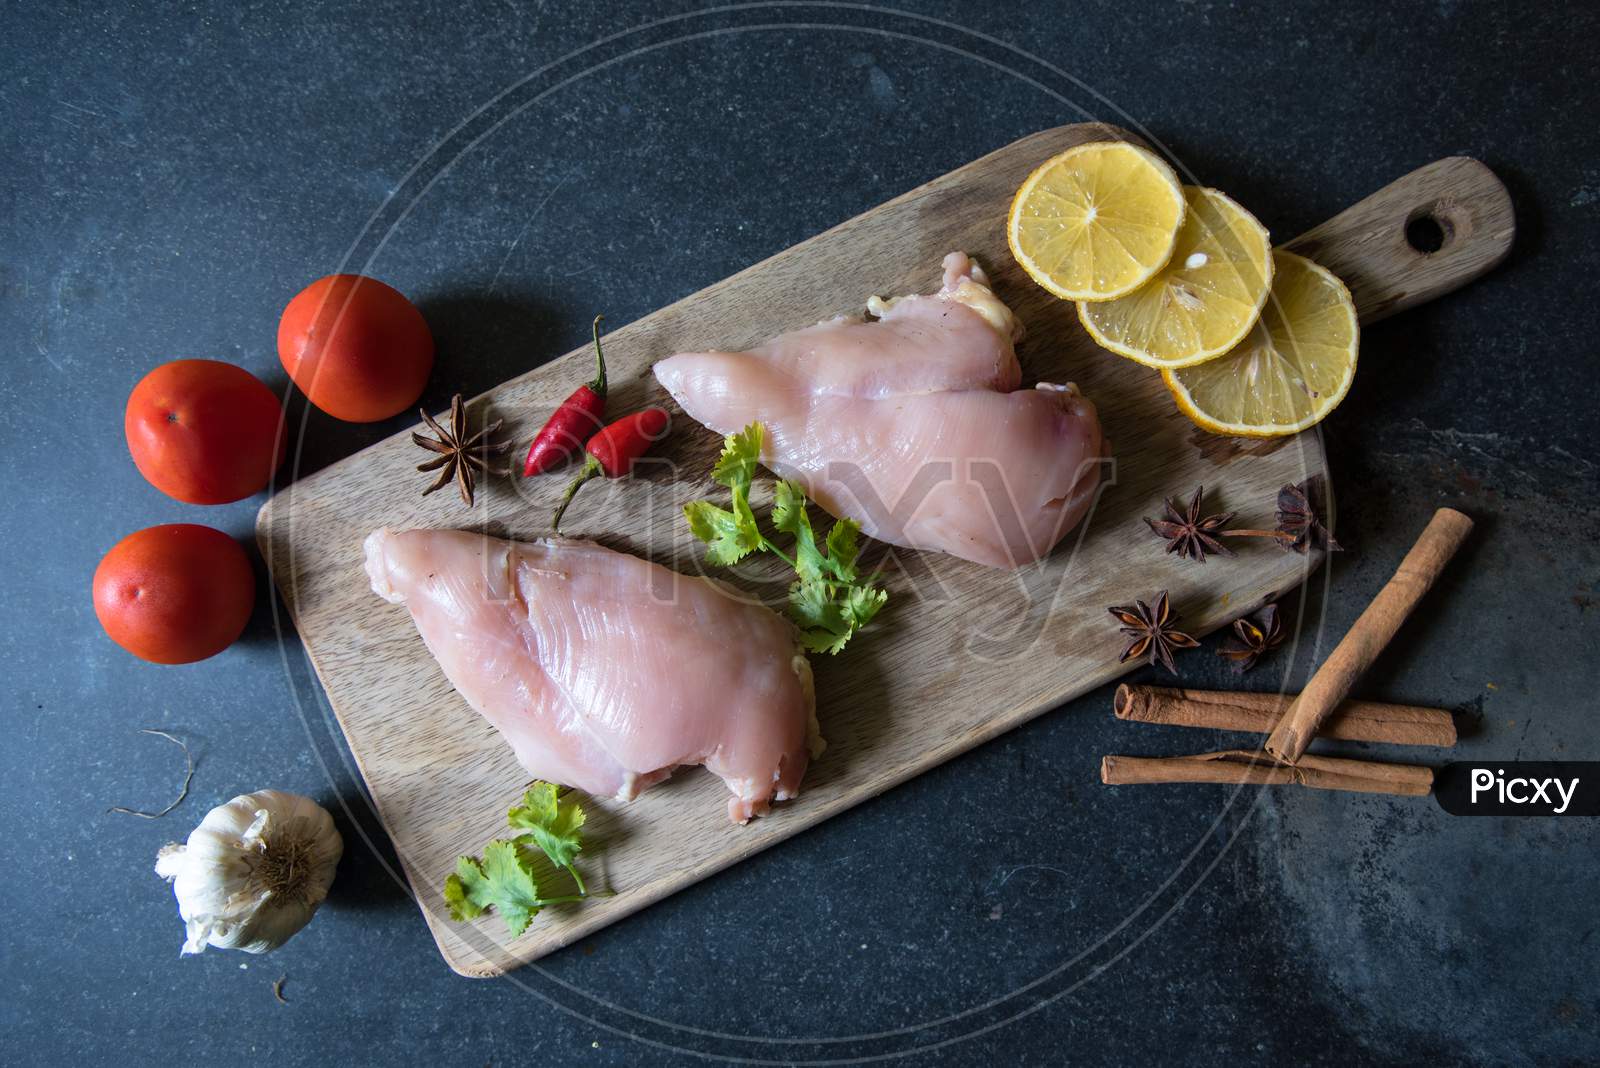 Top view of raw chicken breast on a wooden cutting board